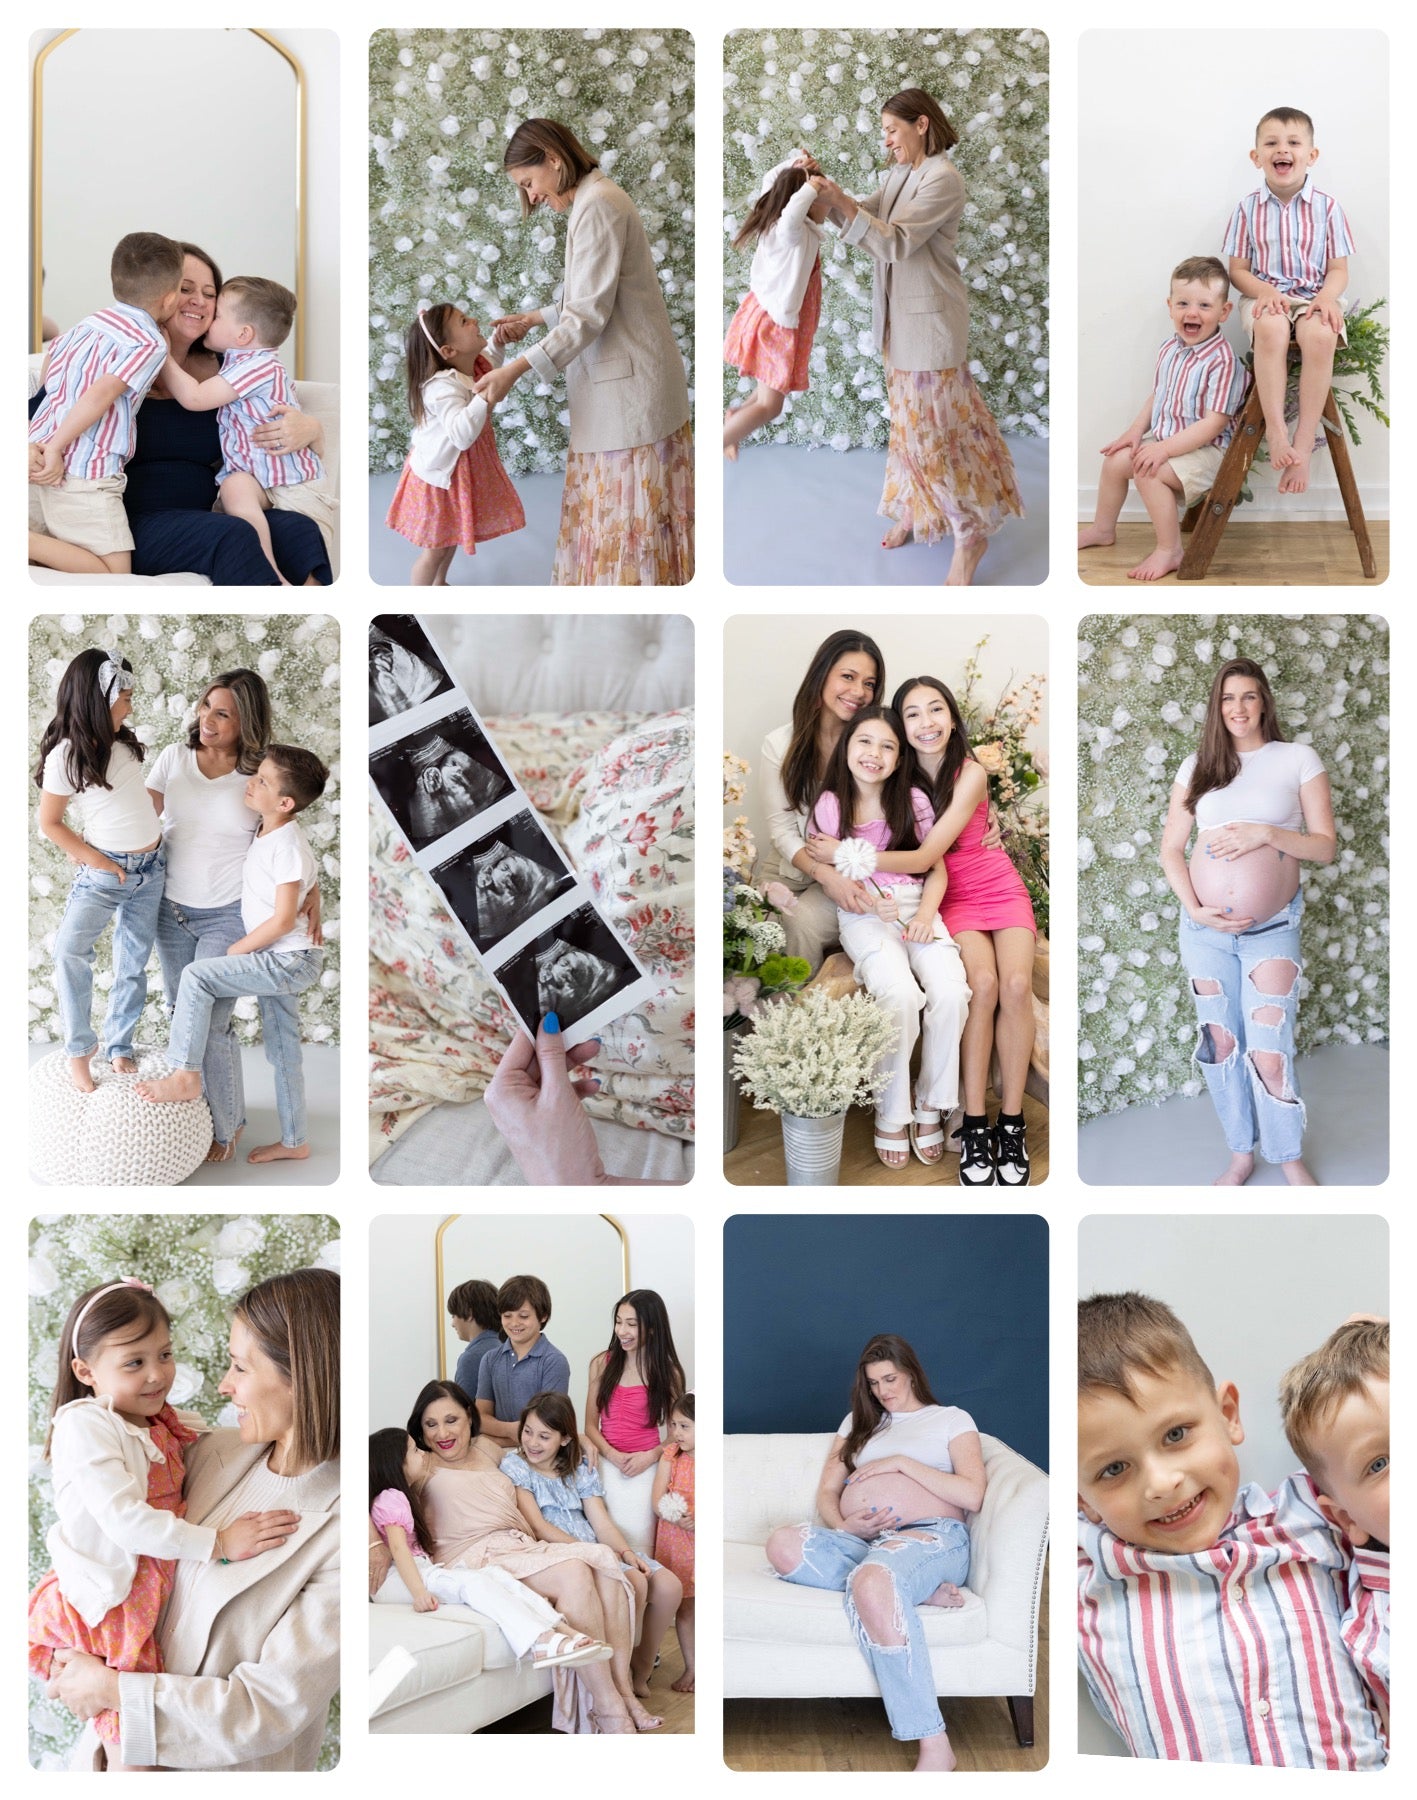 Art of Motherhood Event- a Collaboration with Janelle Brooke Photography - May 4, 2024